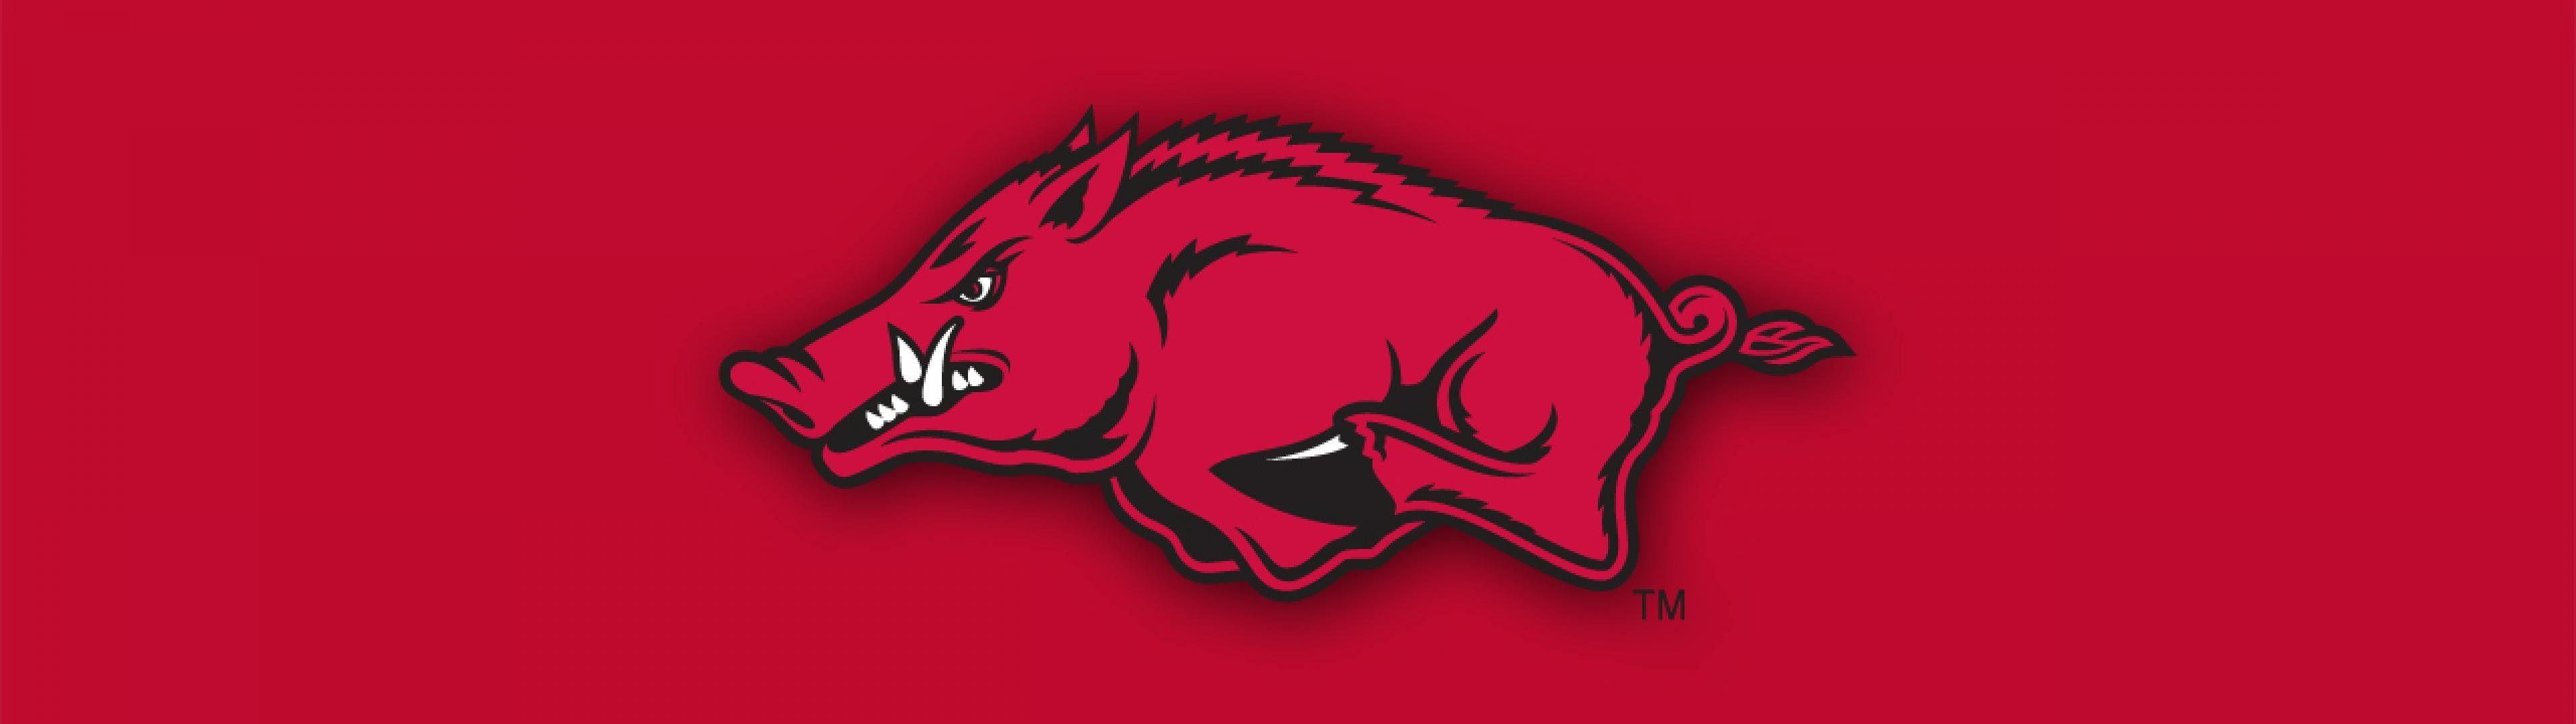 Download The Red and White of the Arkansas Razorbacks Wallpaper   Wallpaperscom